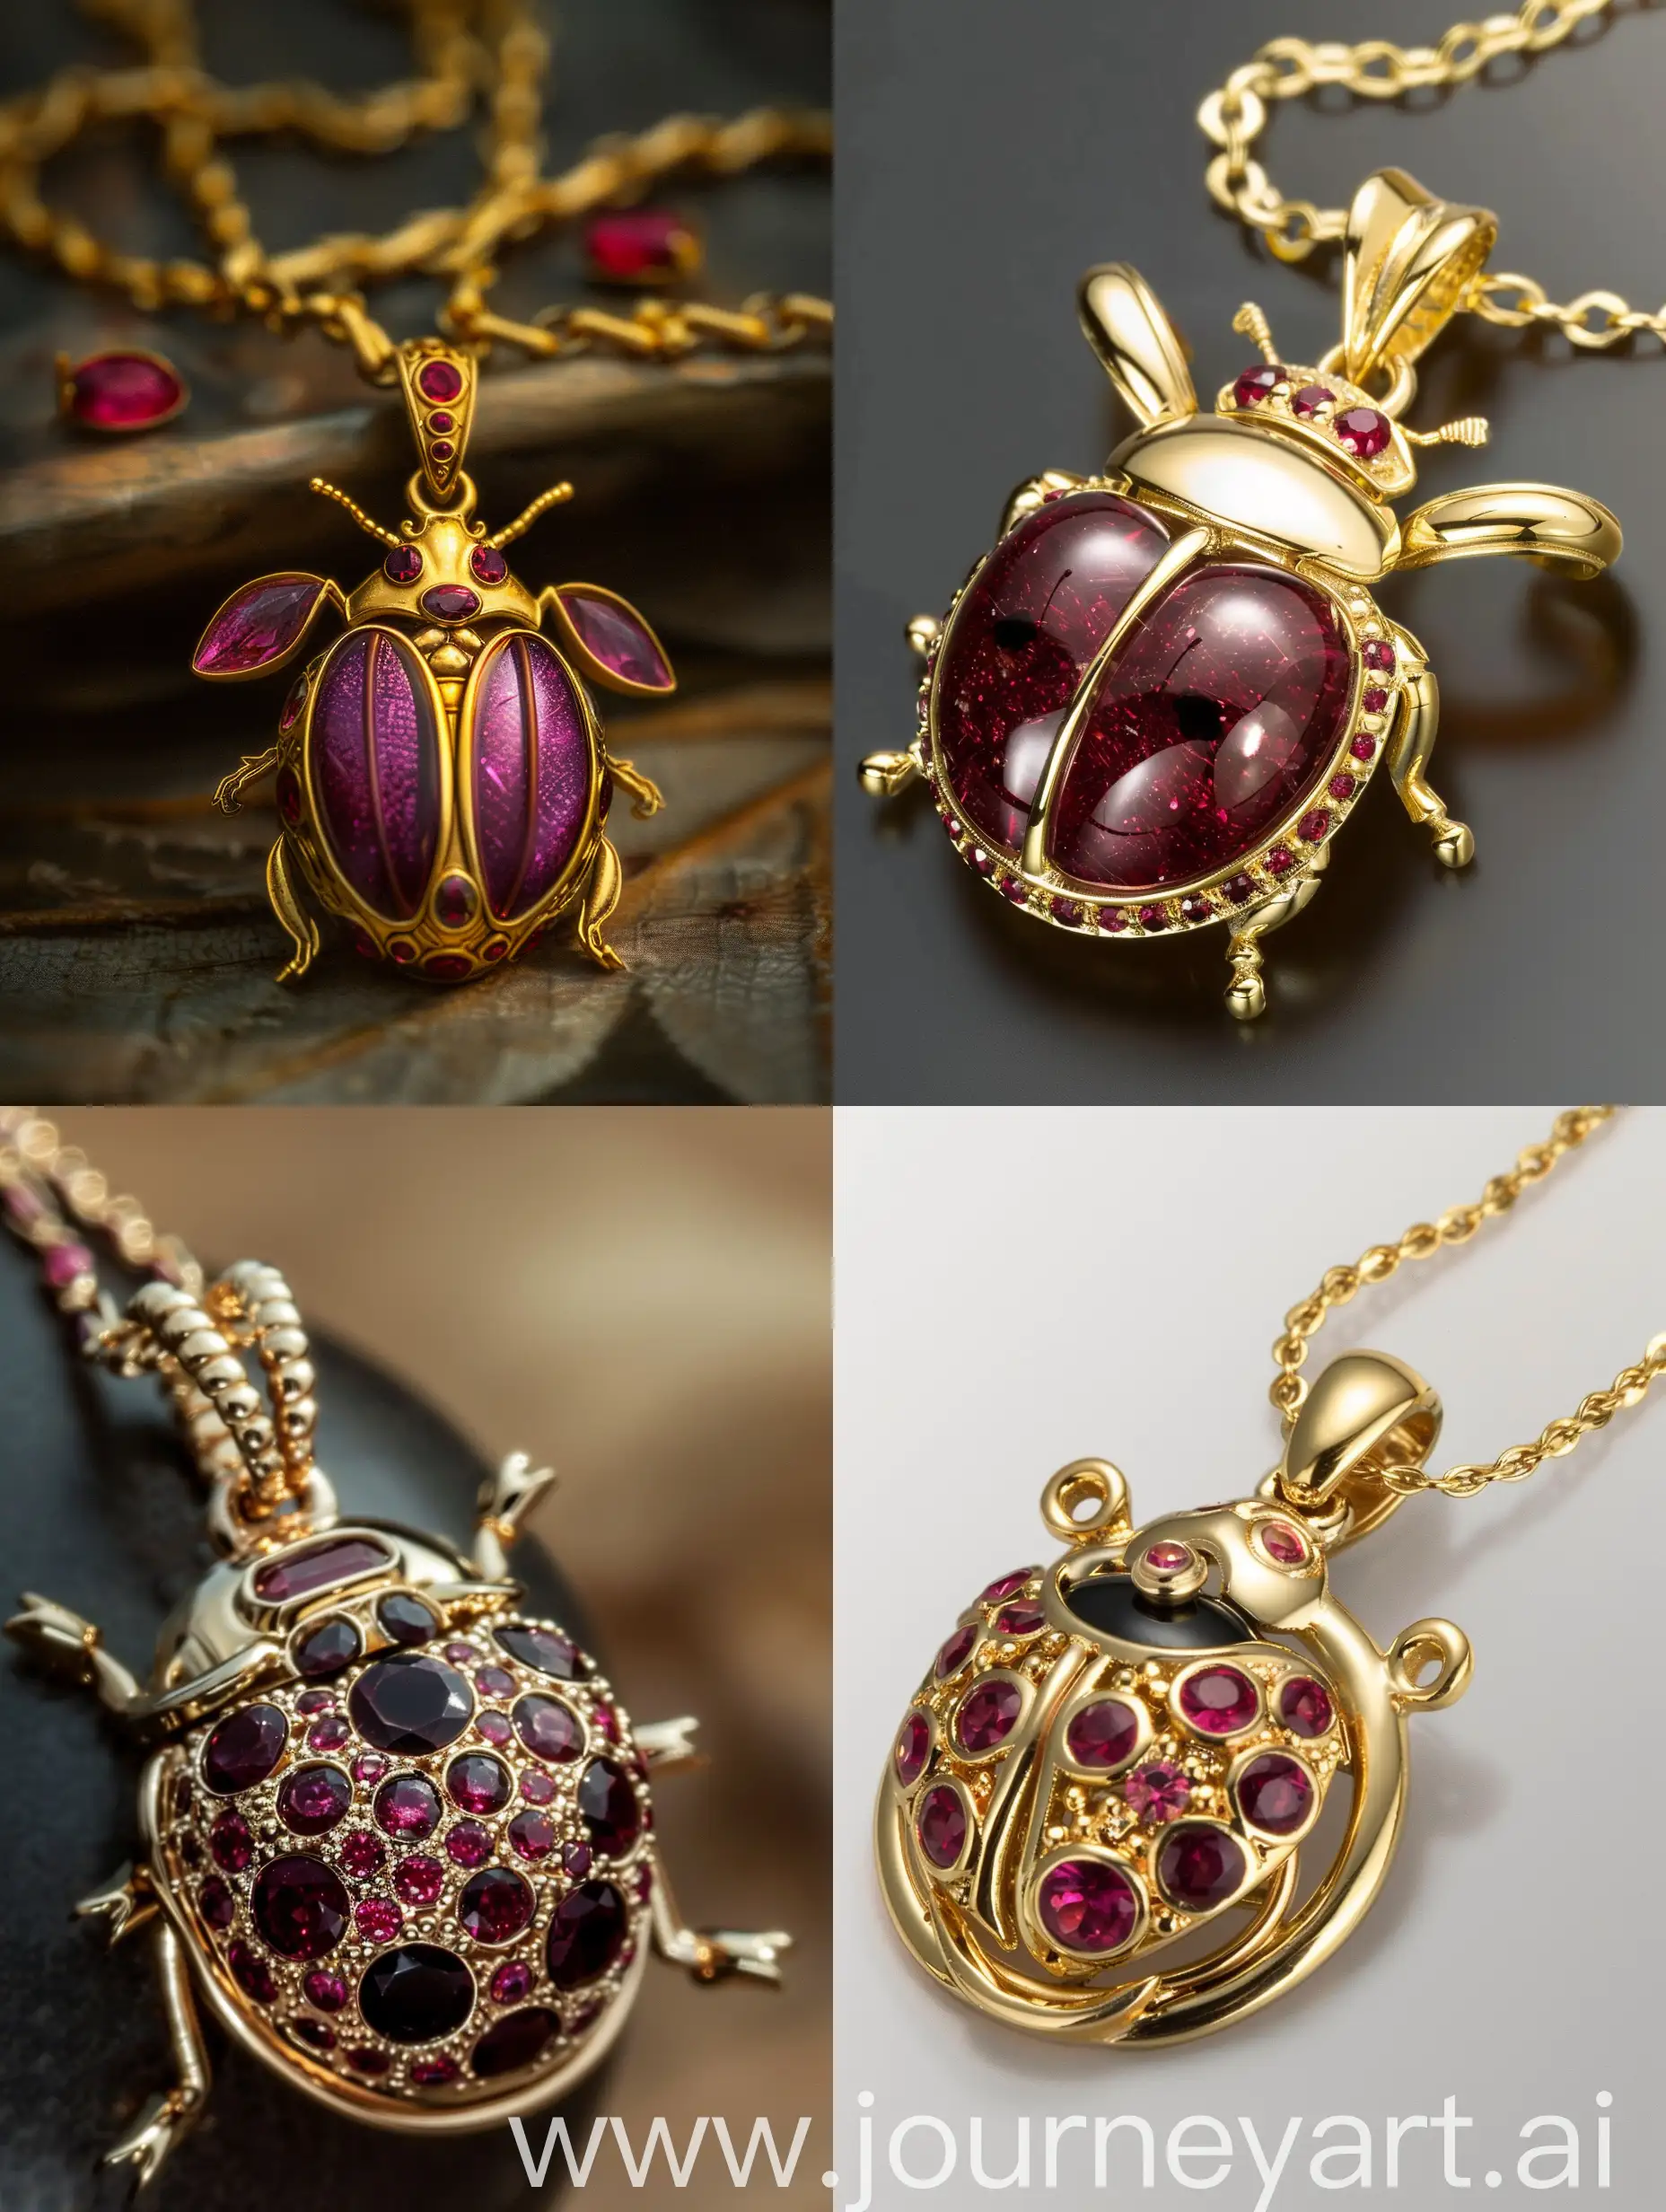 Exquisite-Gold-Ladybug-Pendant-with-Ruby-Accents